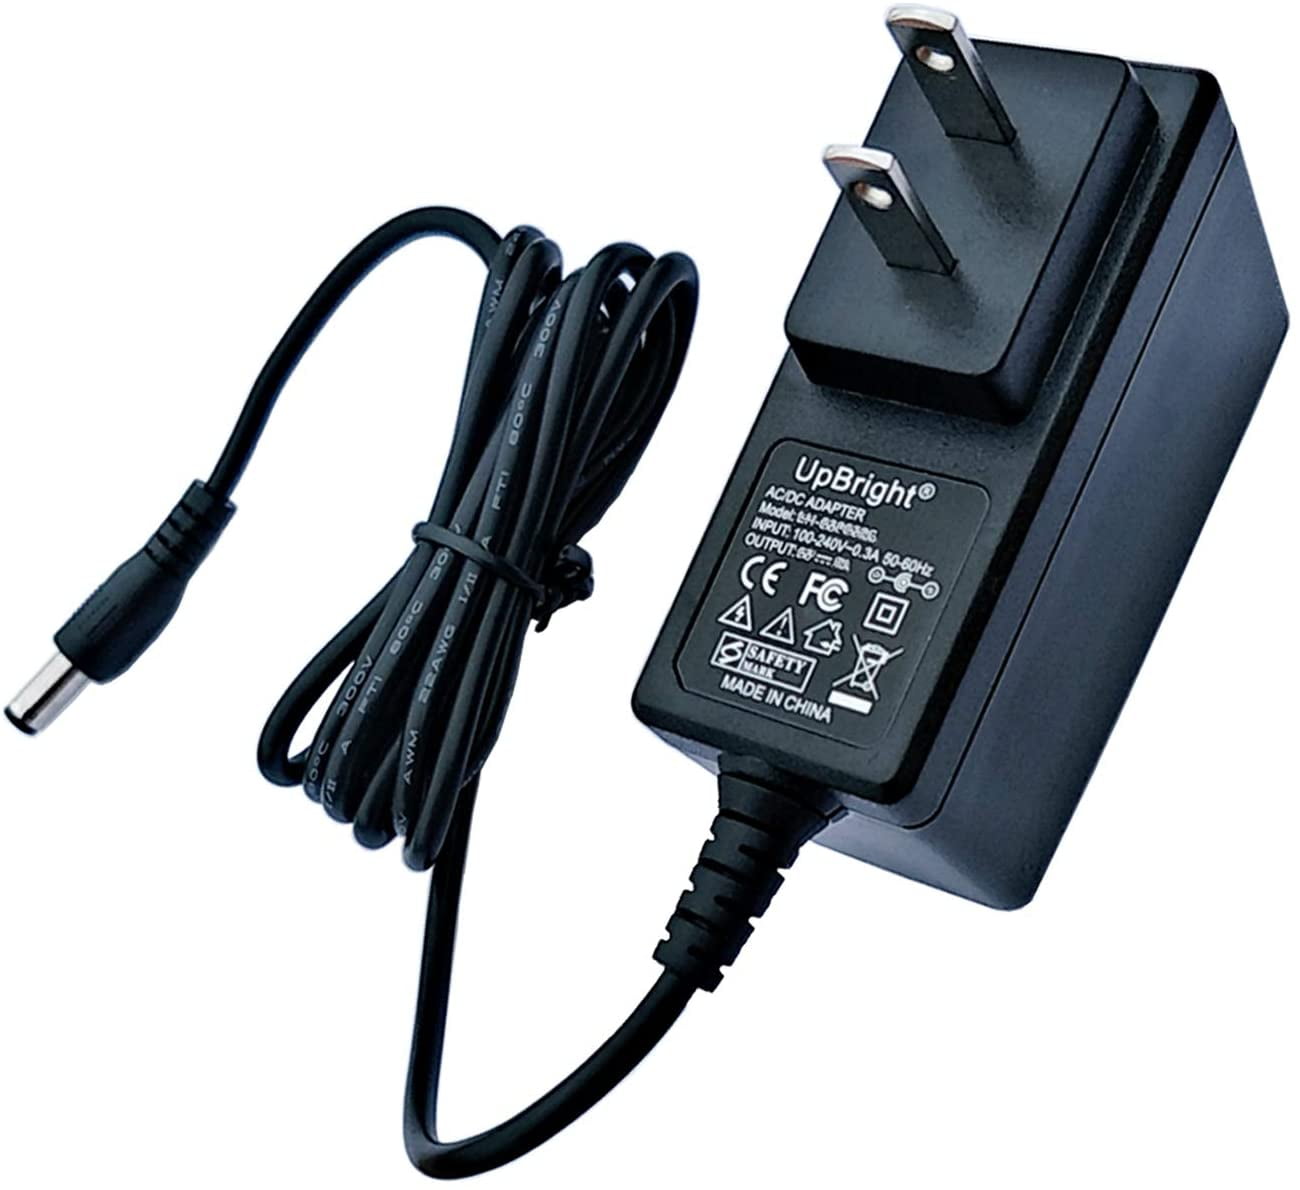 UL 12V AC Adapter Charger For Black & Decker Cordless Drill